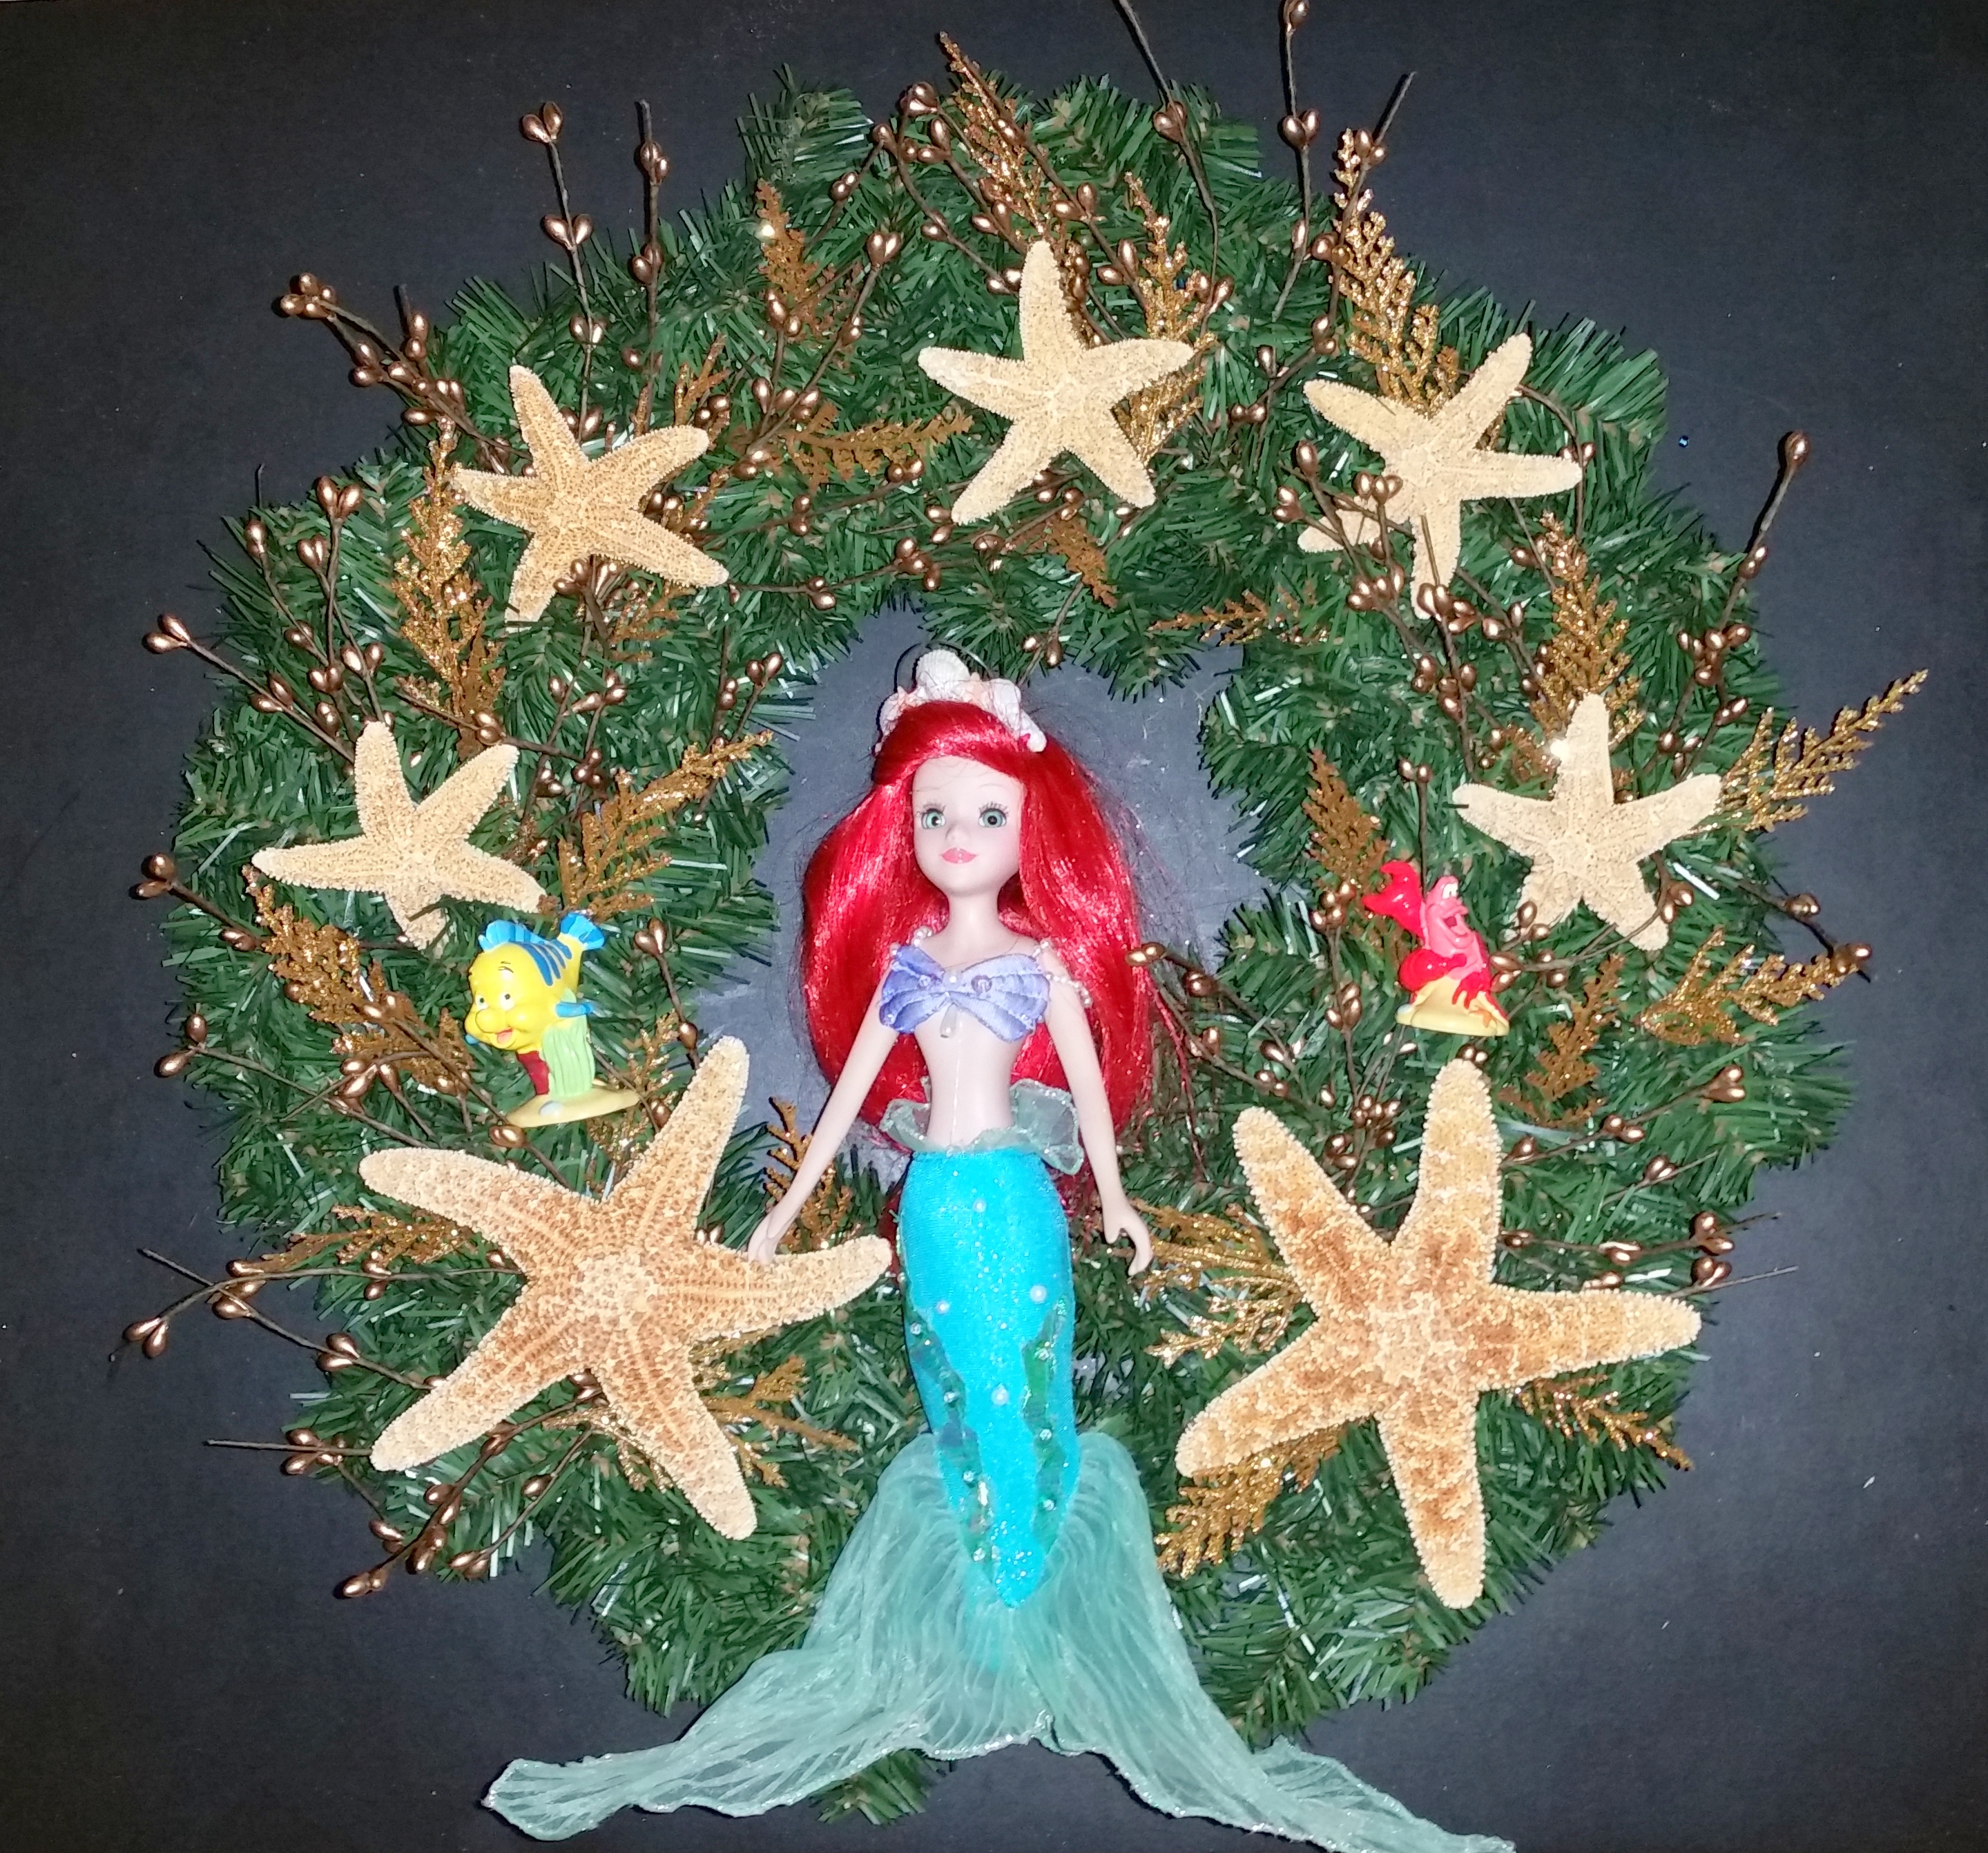 Using Christmas Disney themed wreaths for decorations